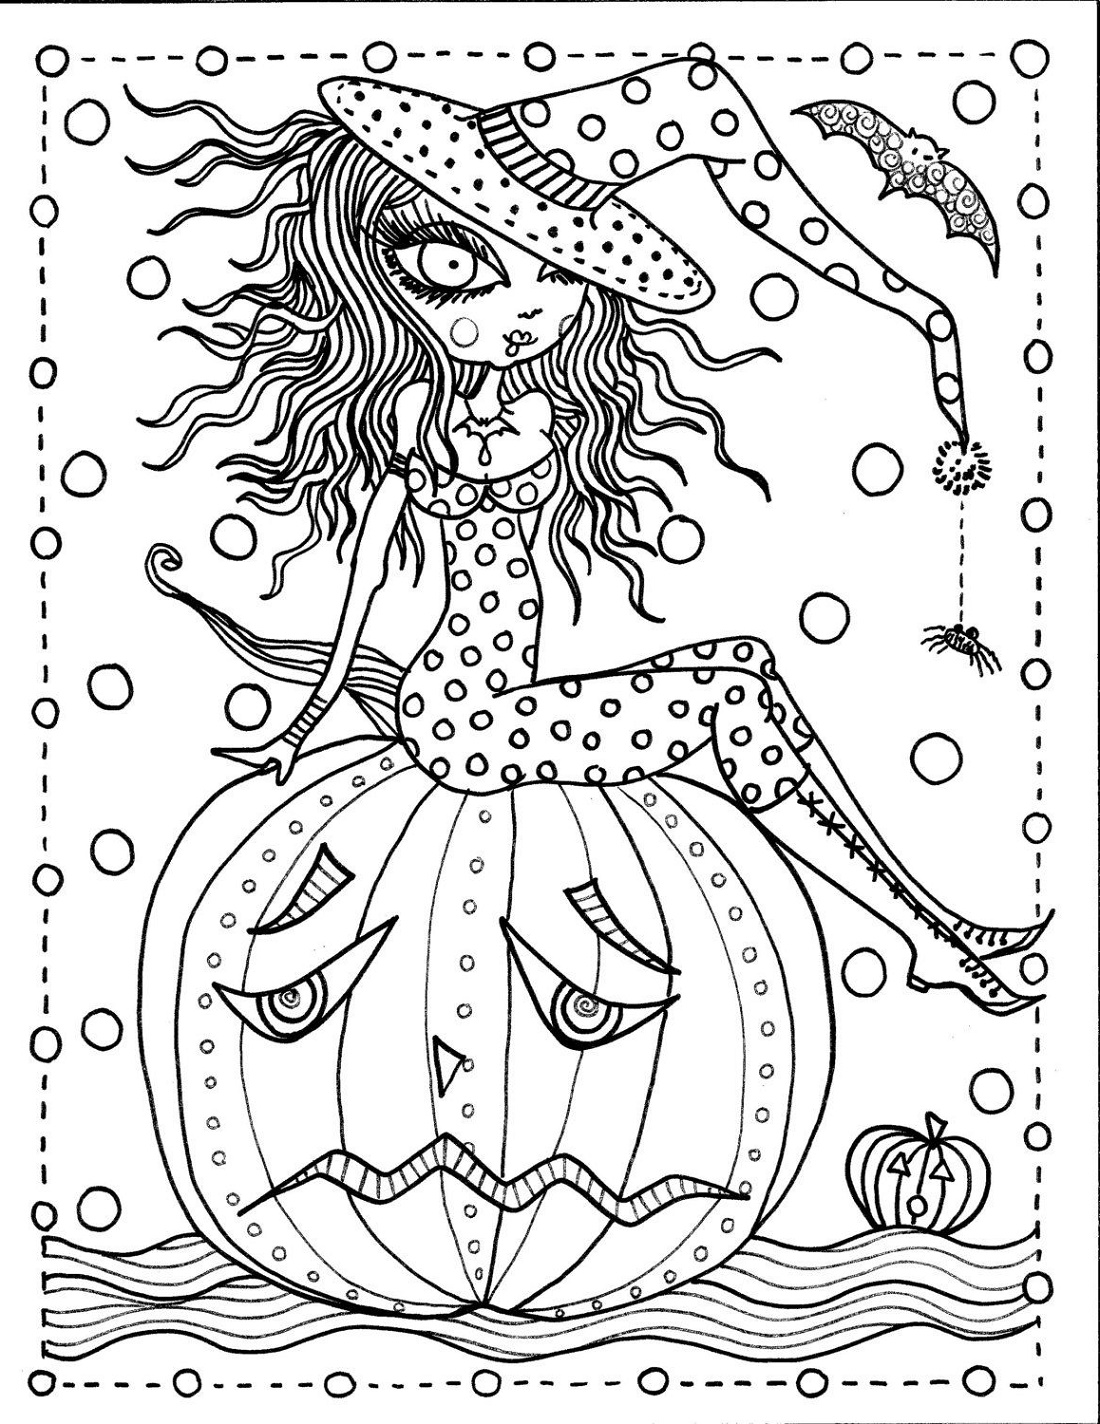 Halloween Coloring Pages For Adults To Print